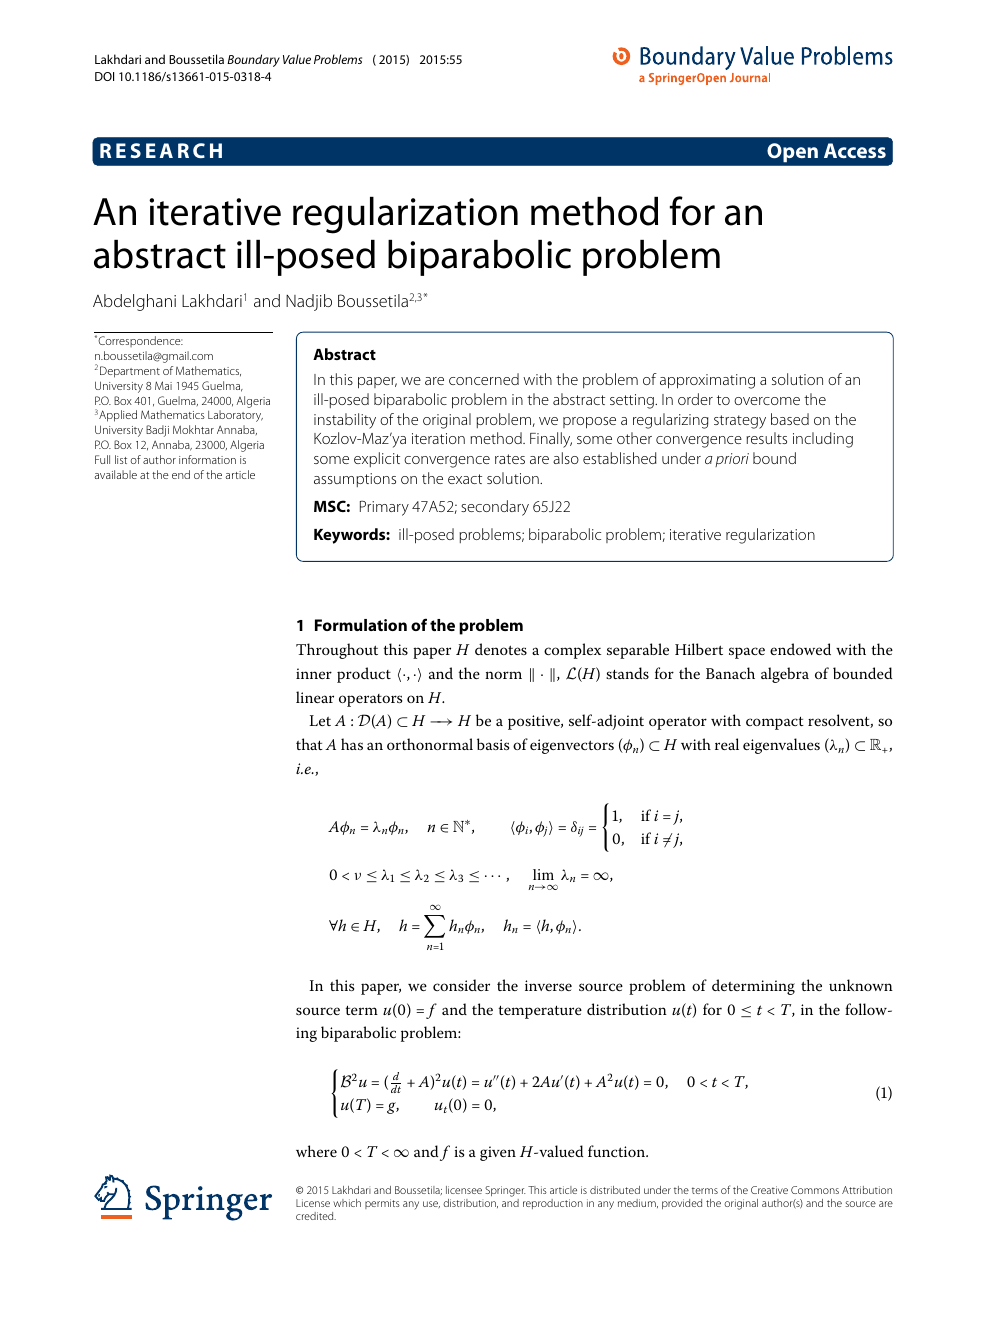 An Iterative Regularization Method For An Abstract Ill Posed Biparabolic Problem Topic Of Research Paper In Mathematics Download Scholarly Article Pdf And Read For Free On Cyberleninka Open Science Hub